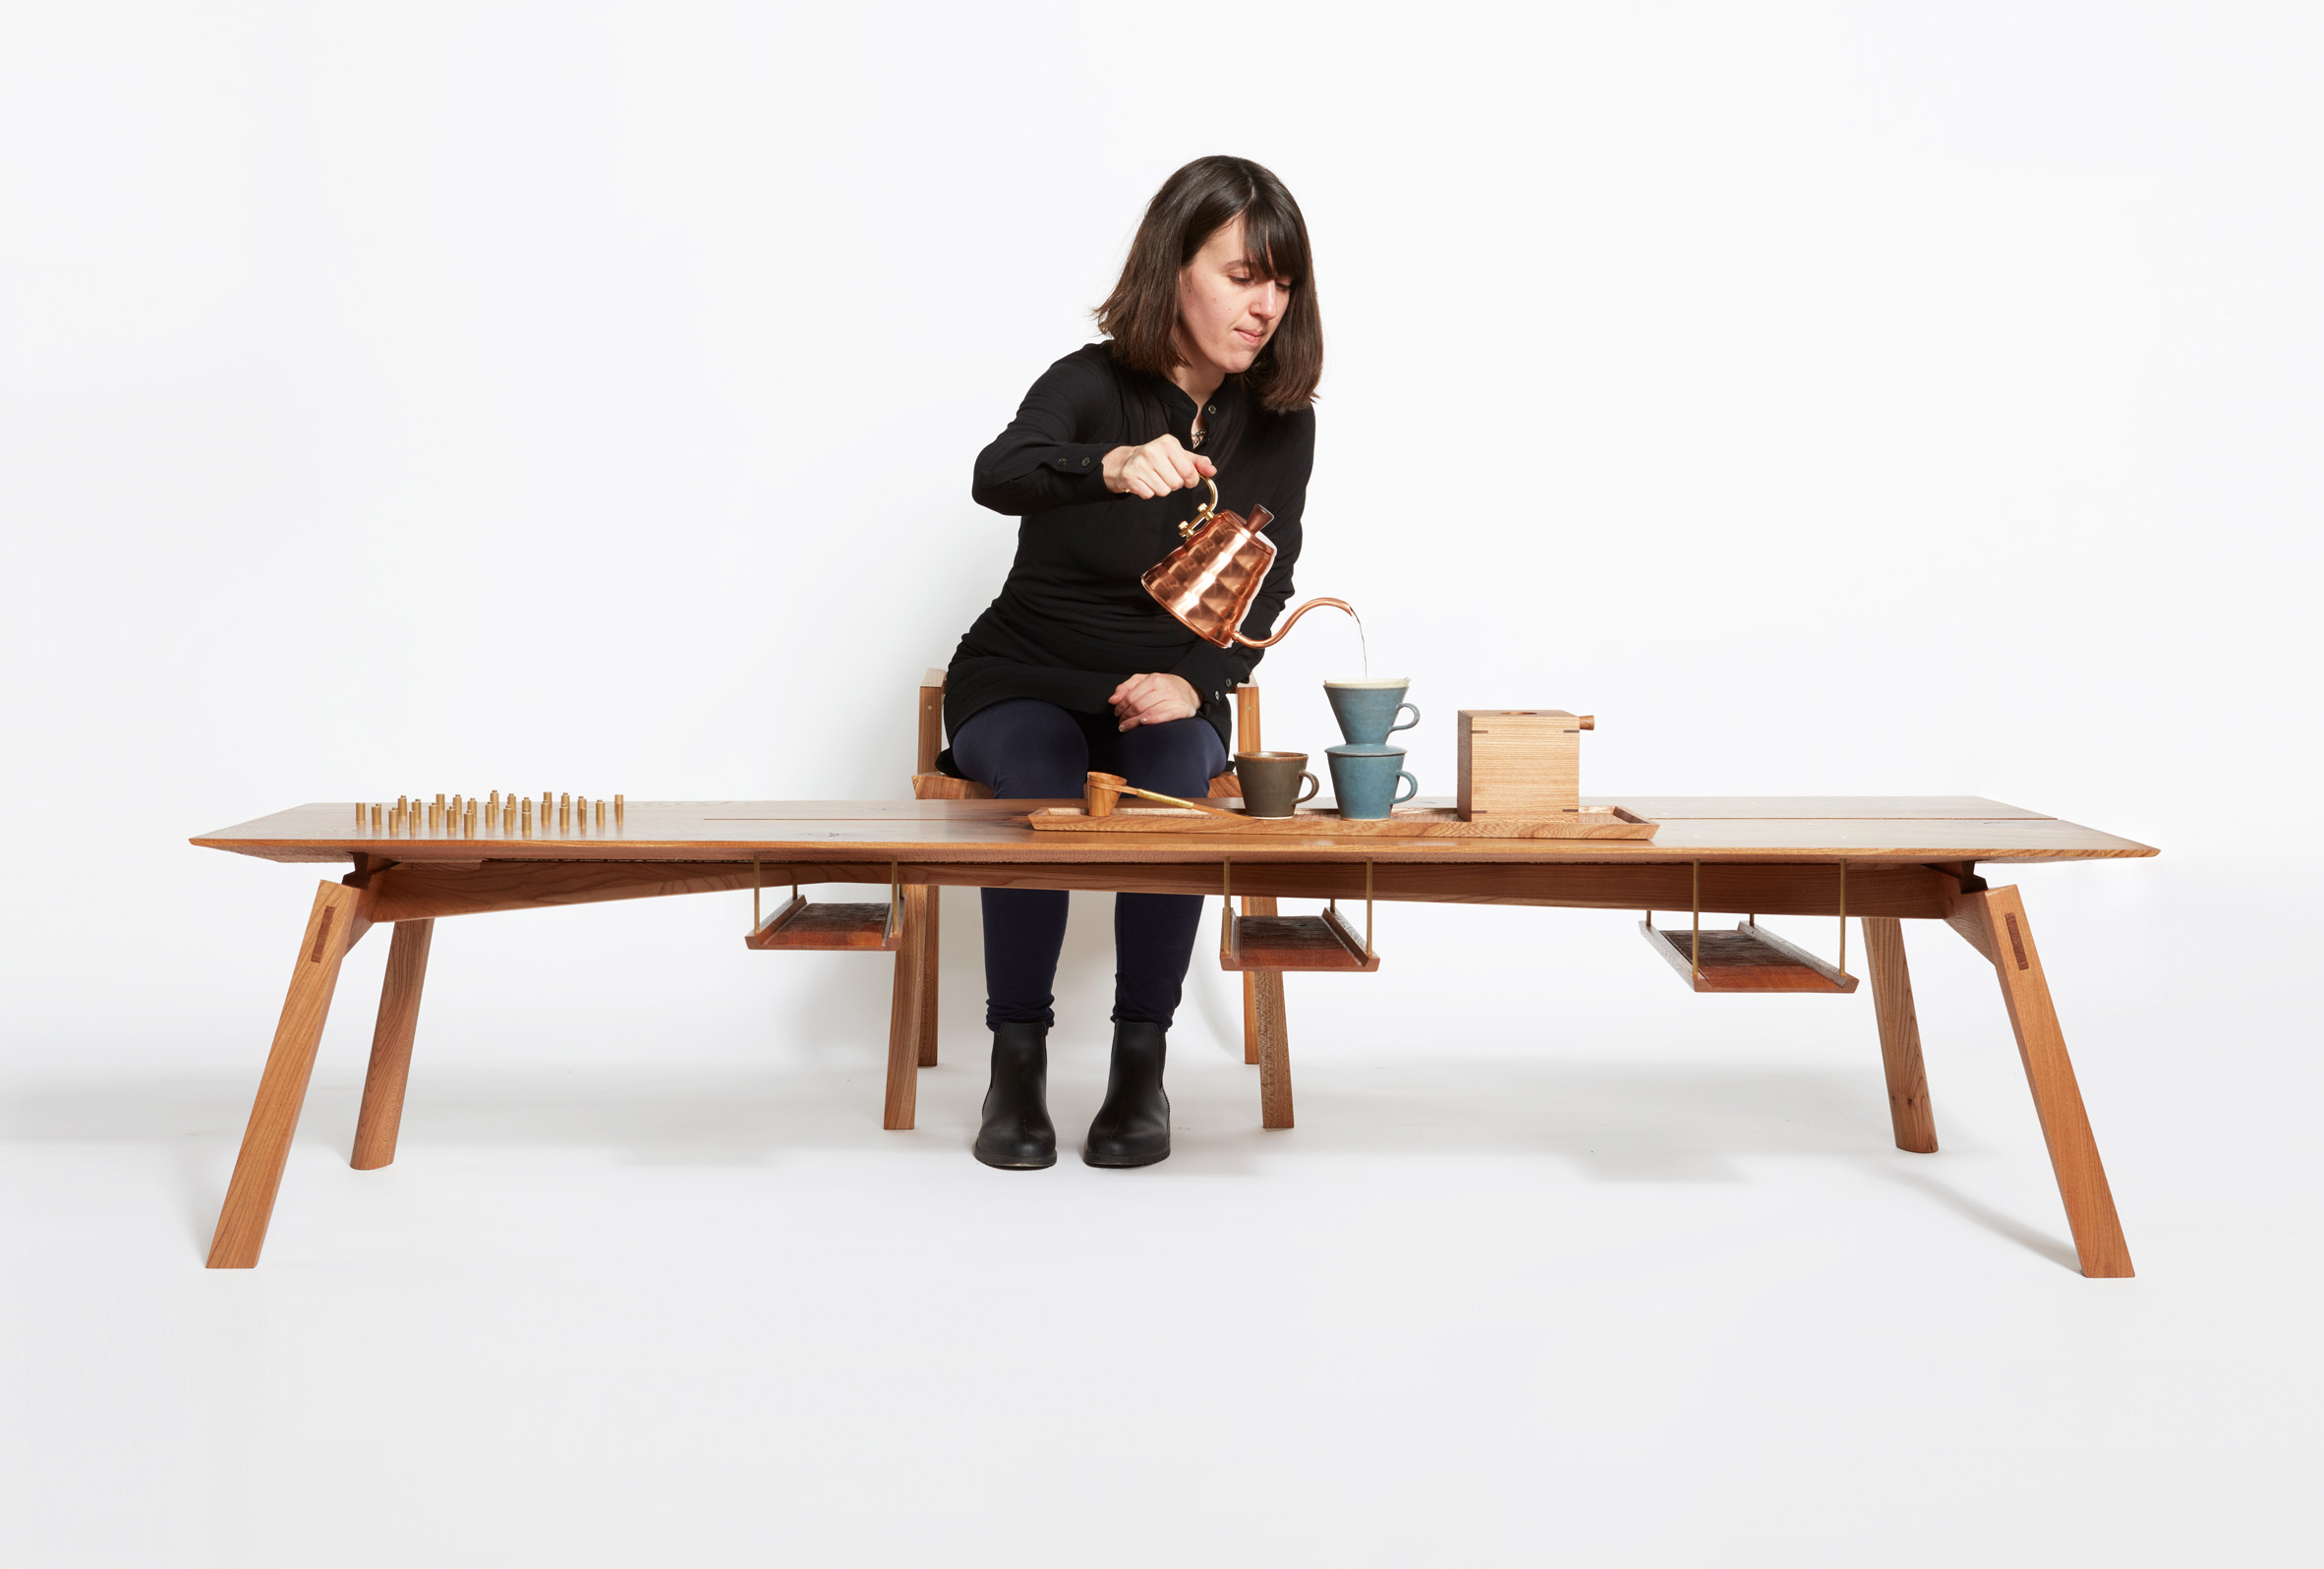 The Coffee Ceremony furniture collection is inspired by Japanese traditions of tea ceremonies